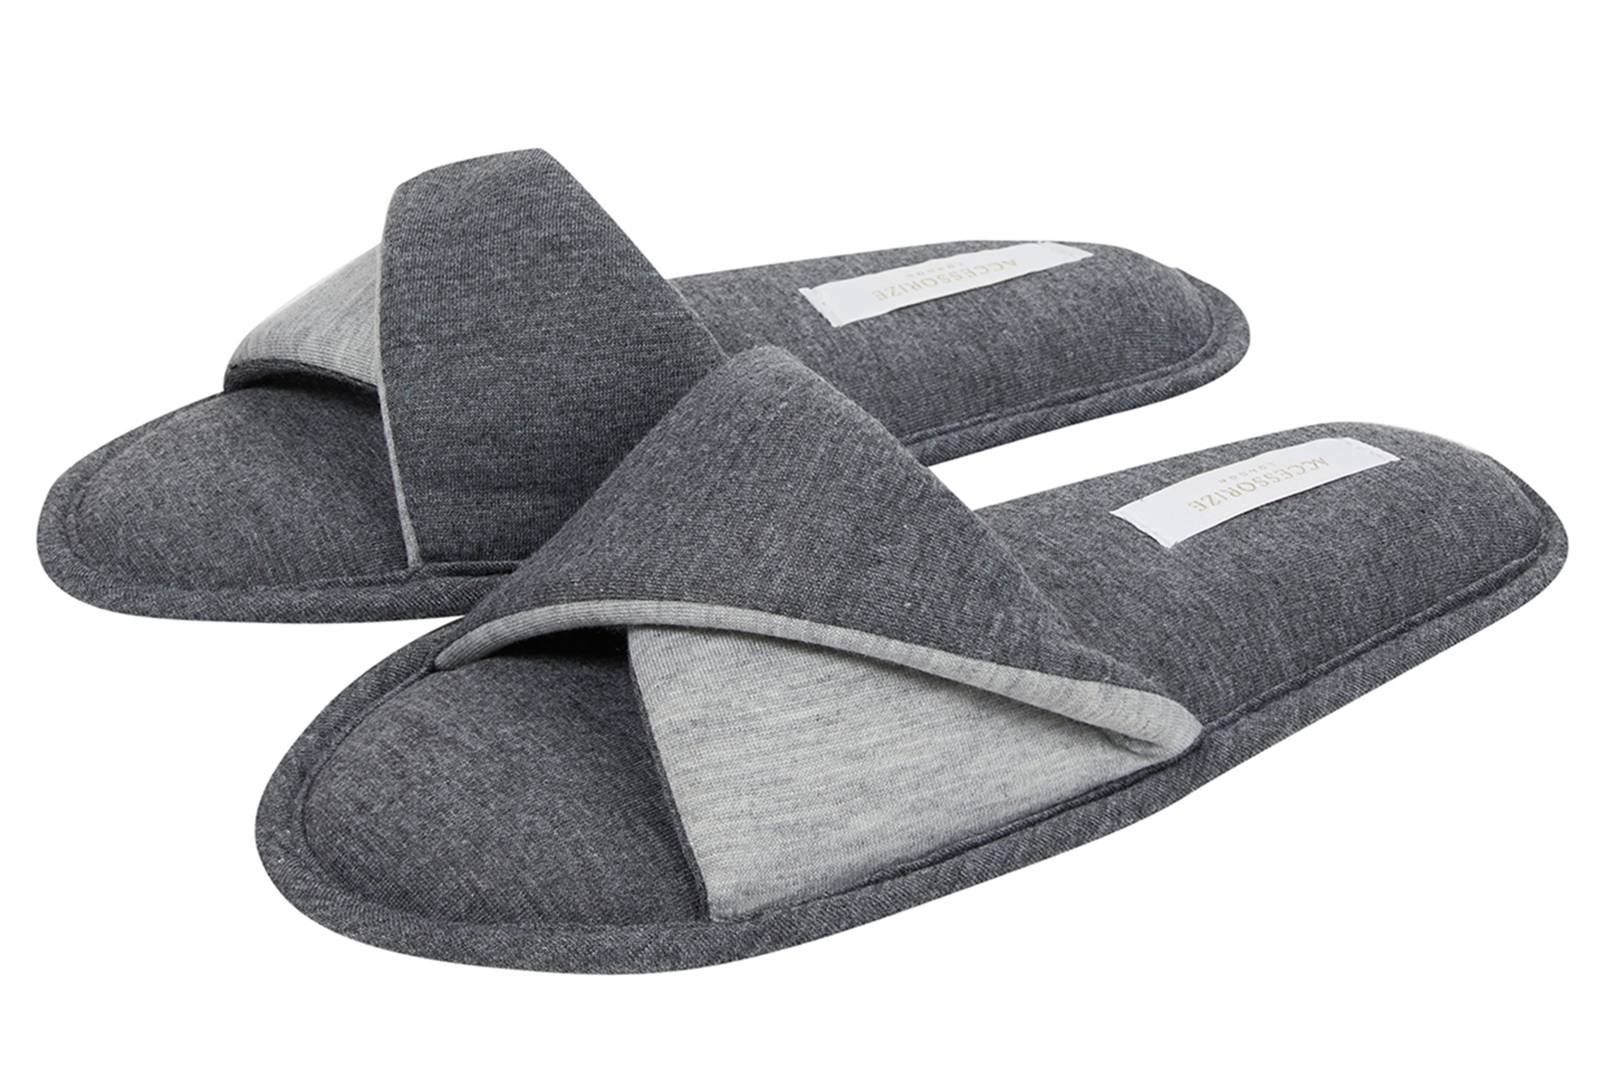 15 Pairs Of Slippers To Wear All Day During Self-Isolation | Glamour UK